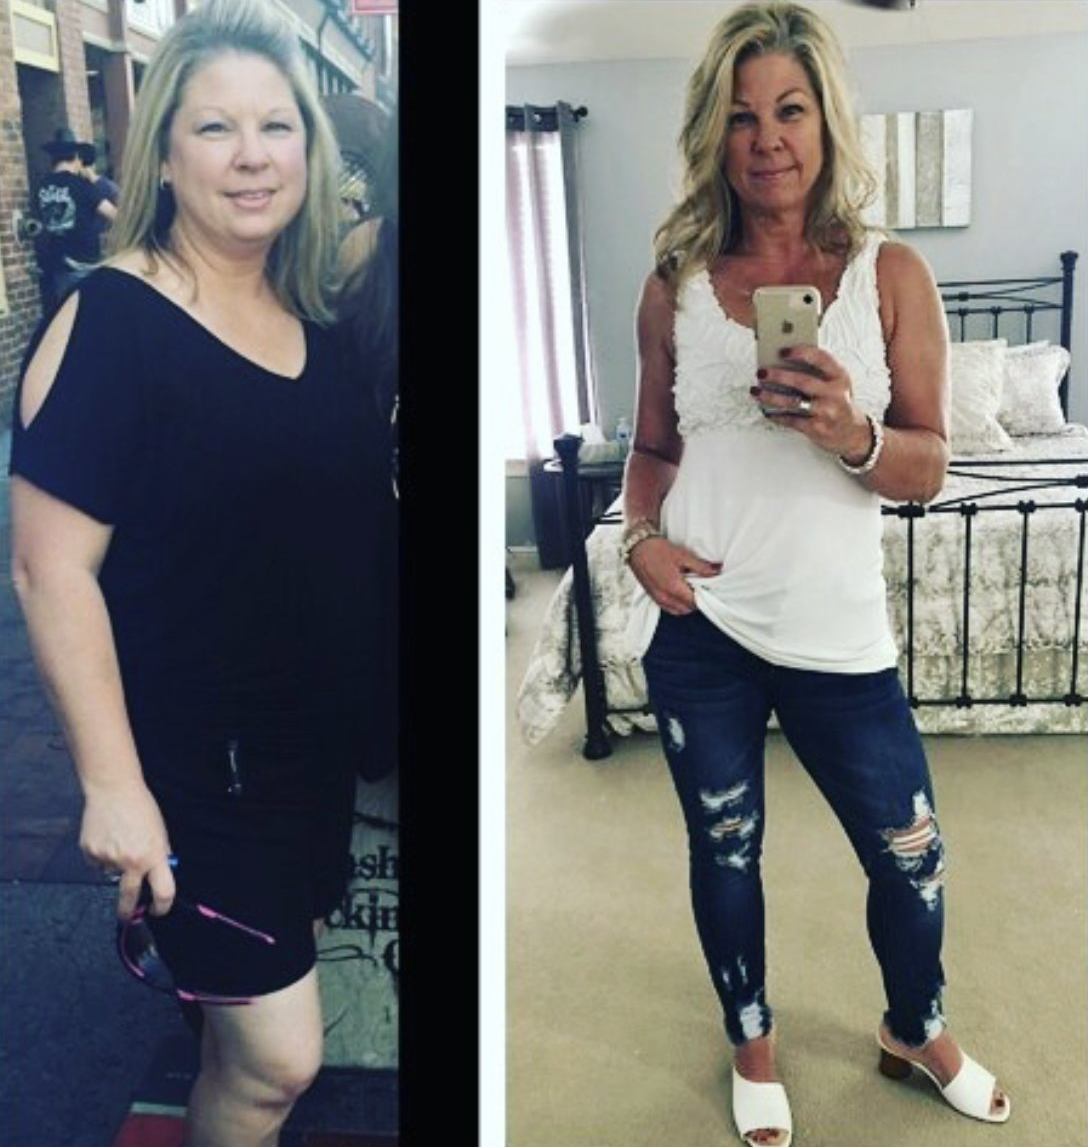 Image of Lisa Friedl before and after joining